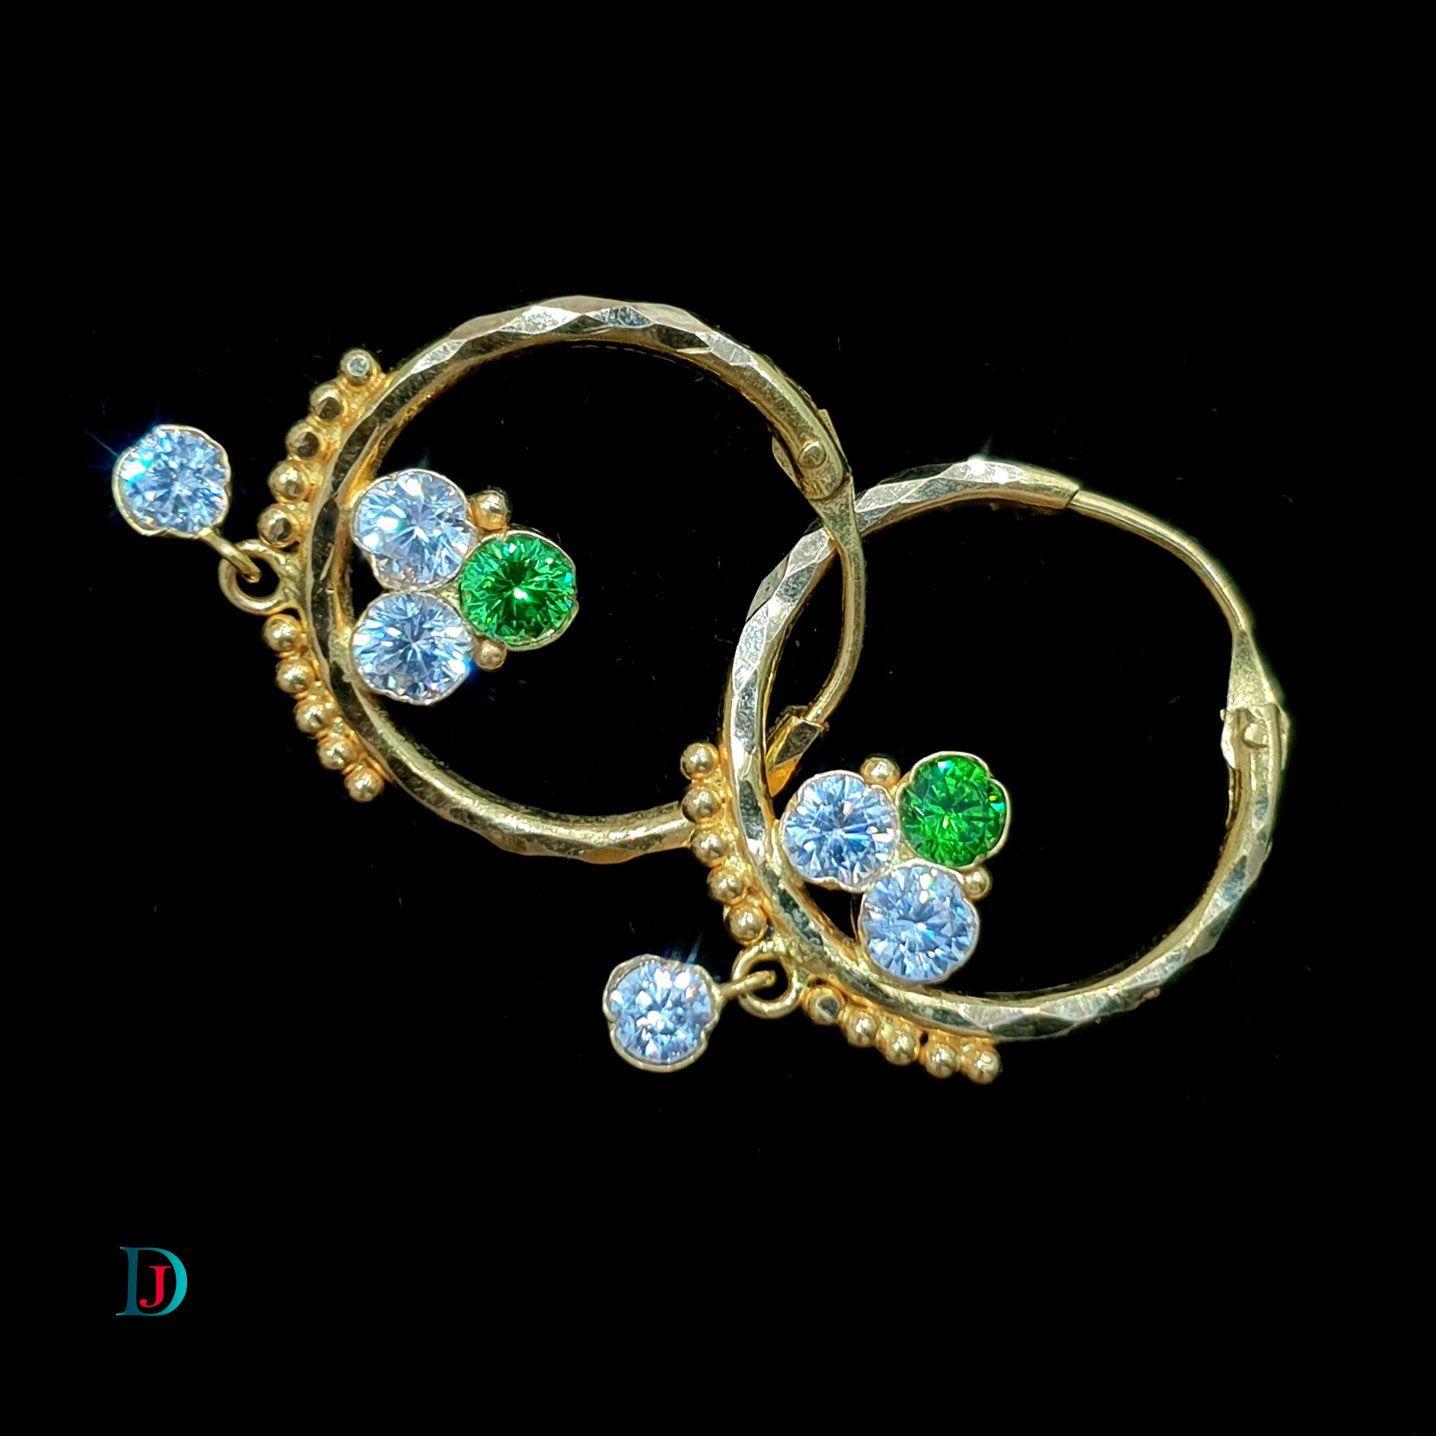 New and Latest Design of Desi Indian Rajasthani Gold Baali/Earrings 